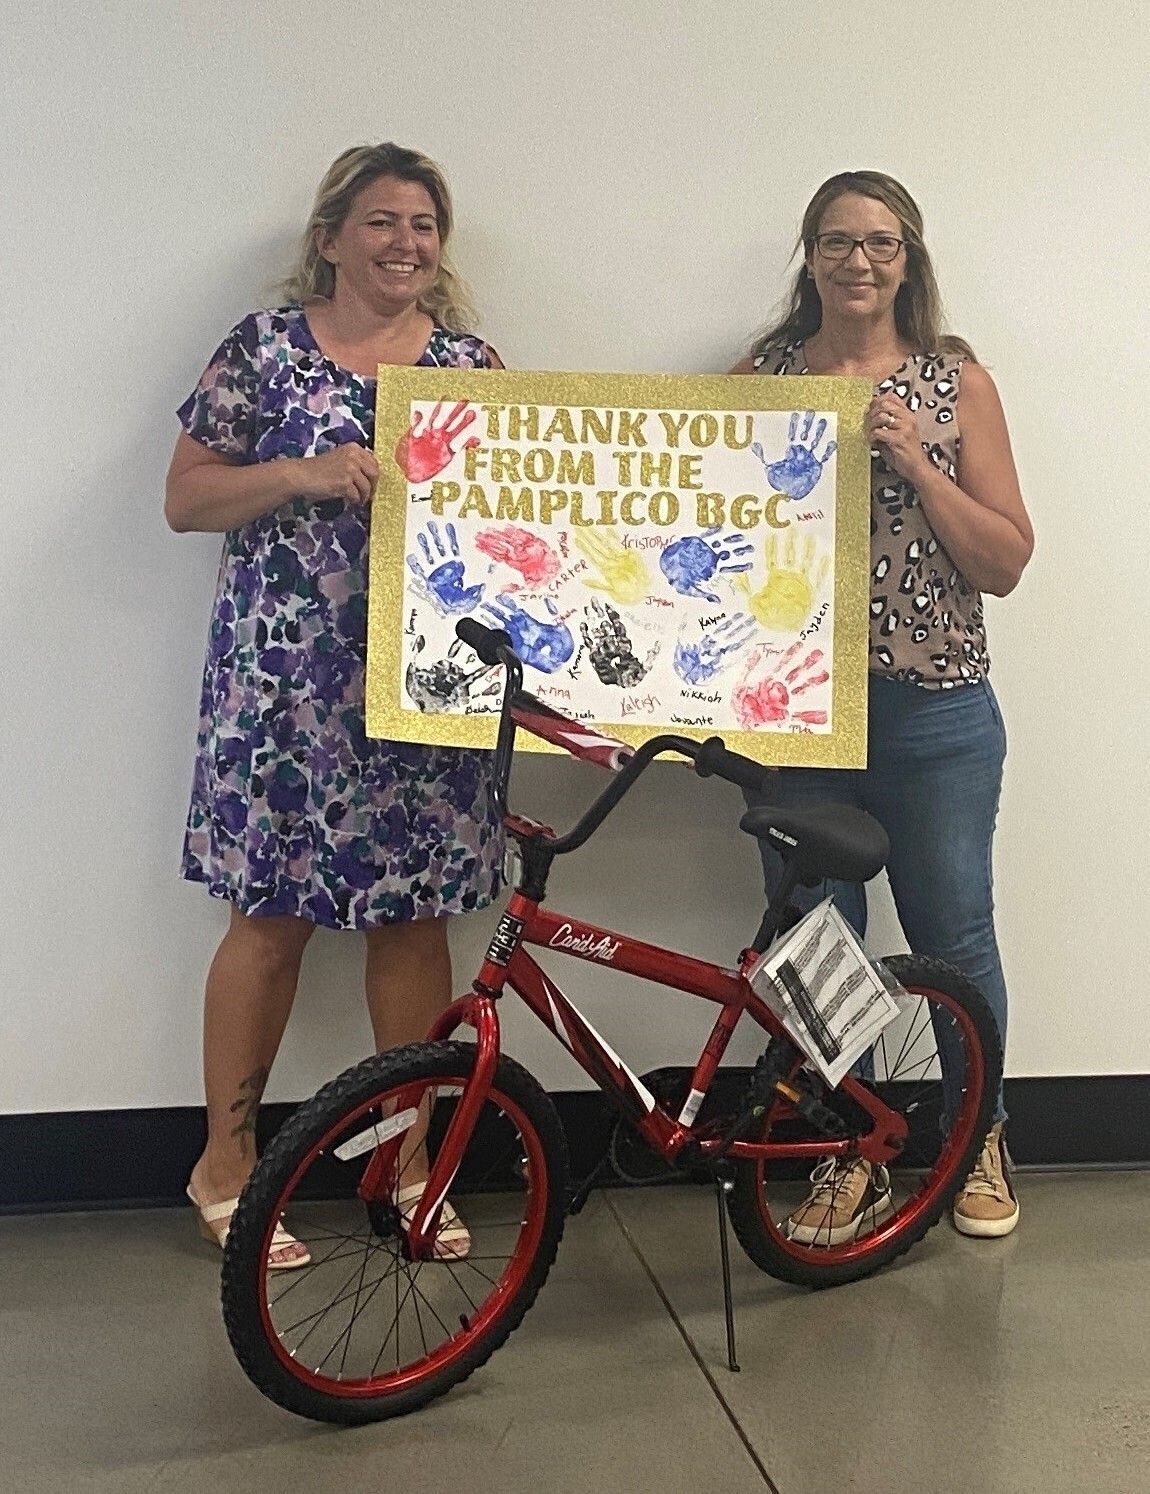 Final bicycle delivered to Pamplico Boys & Girls Club